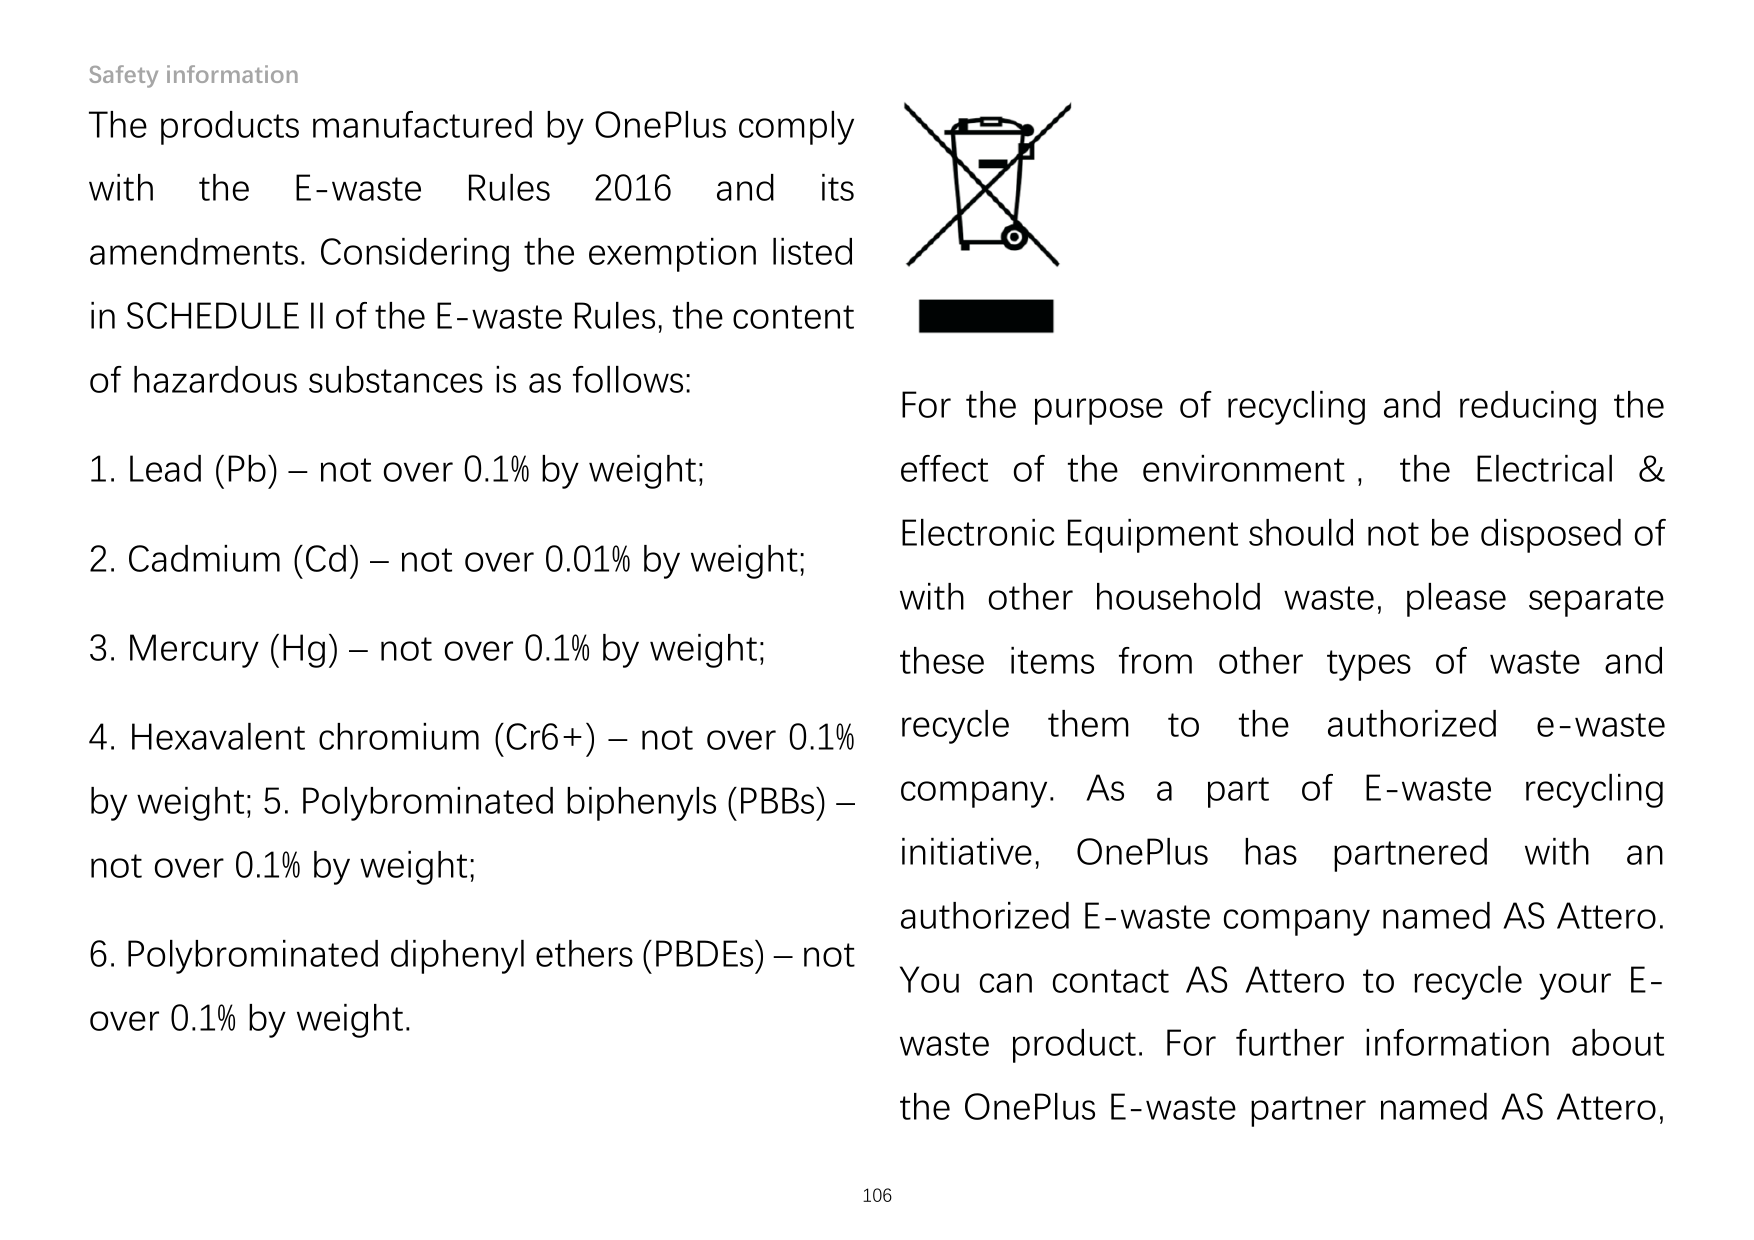 Safety informationThe products manufactured by OnePlus complywiththeE-wasteRules2016anditsamendments. Considering the exemption 